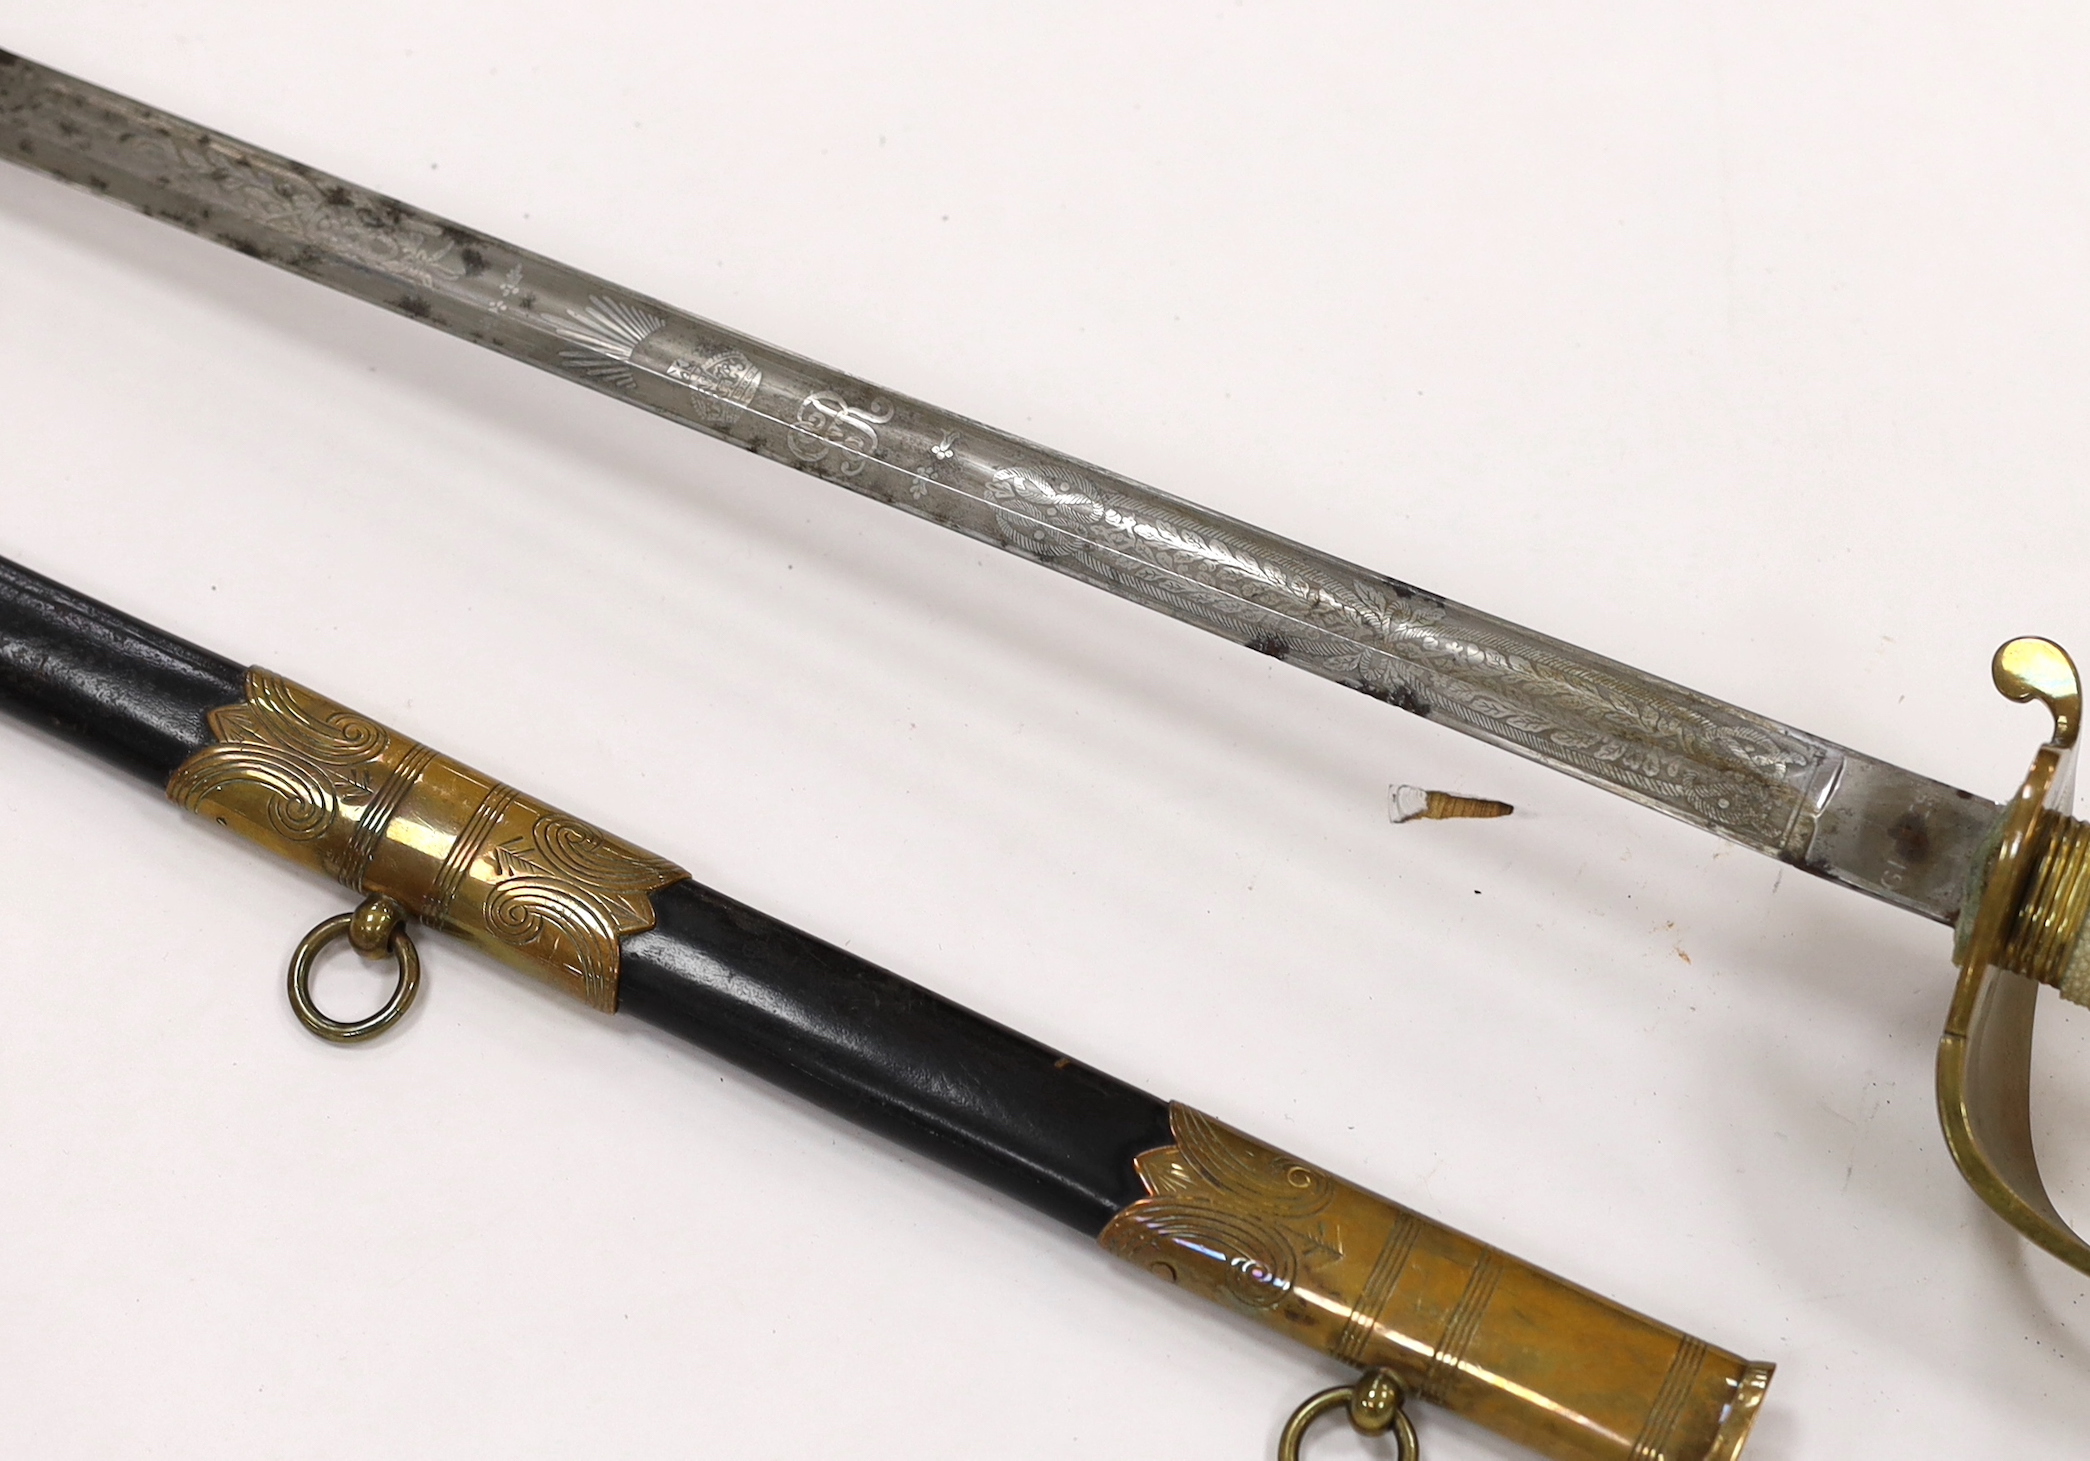 A George V naval officer’s sword, maker Grieves, in a leather scabbard, guard engraved G.P. Bewley, blade 79.5cm, together with outer leather cover